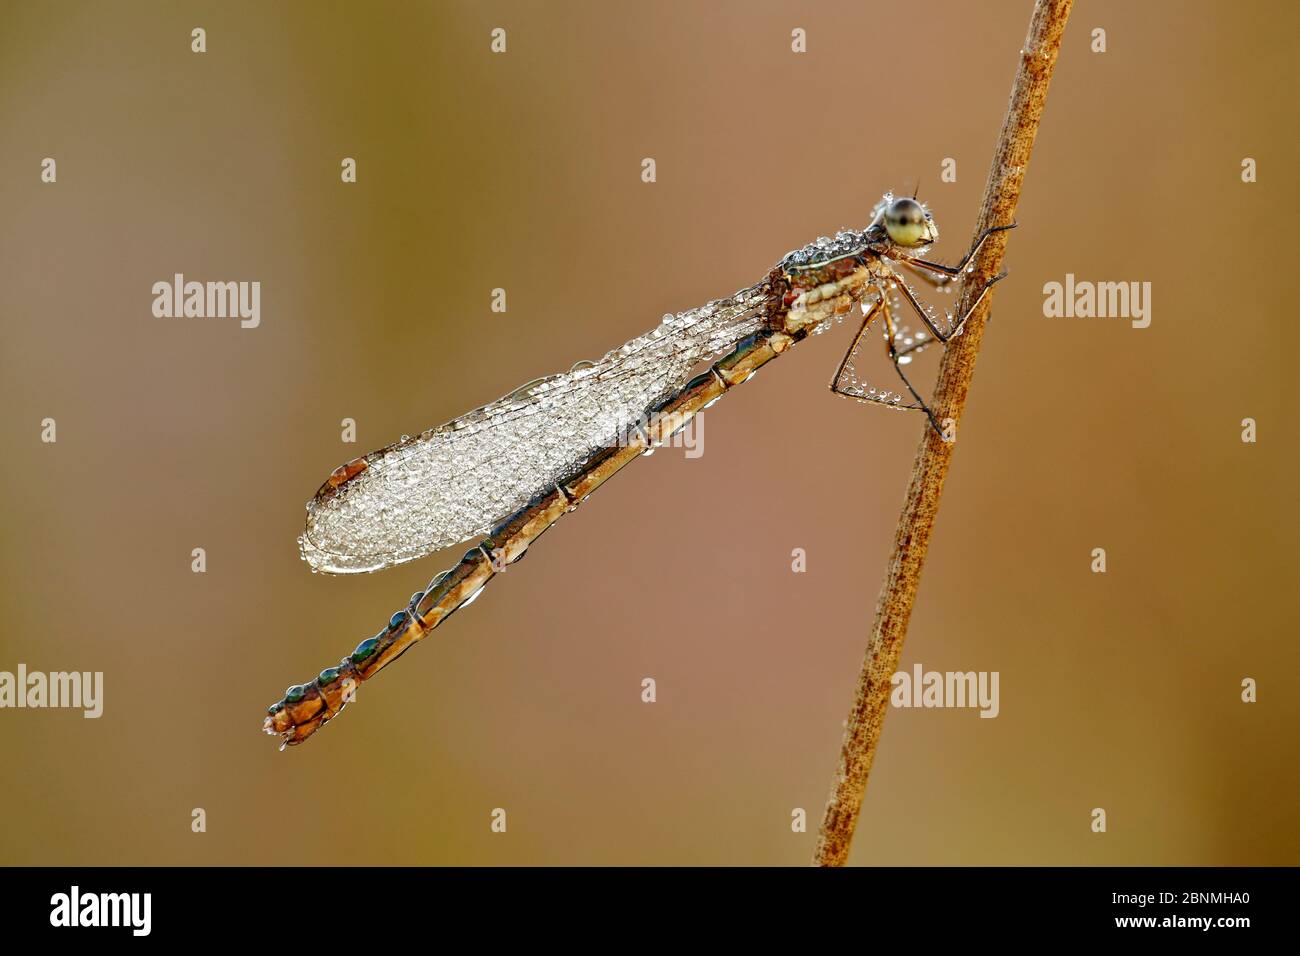 Damselfly (Lestes sp.) covered in dew, Sologne region, France, September. Stock Photo